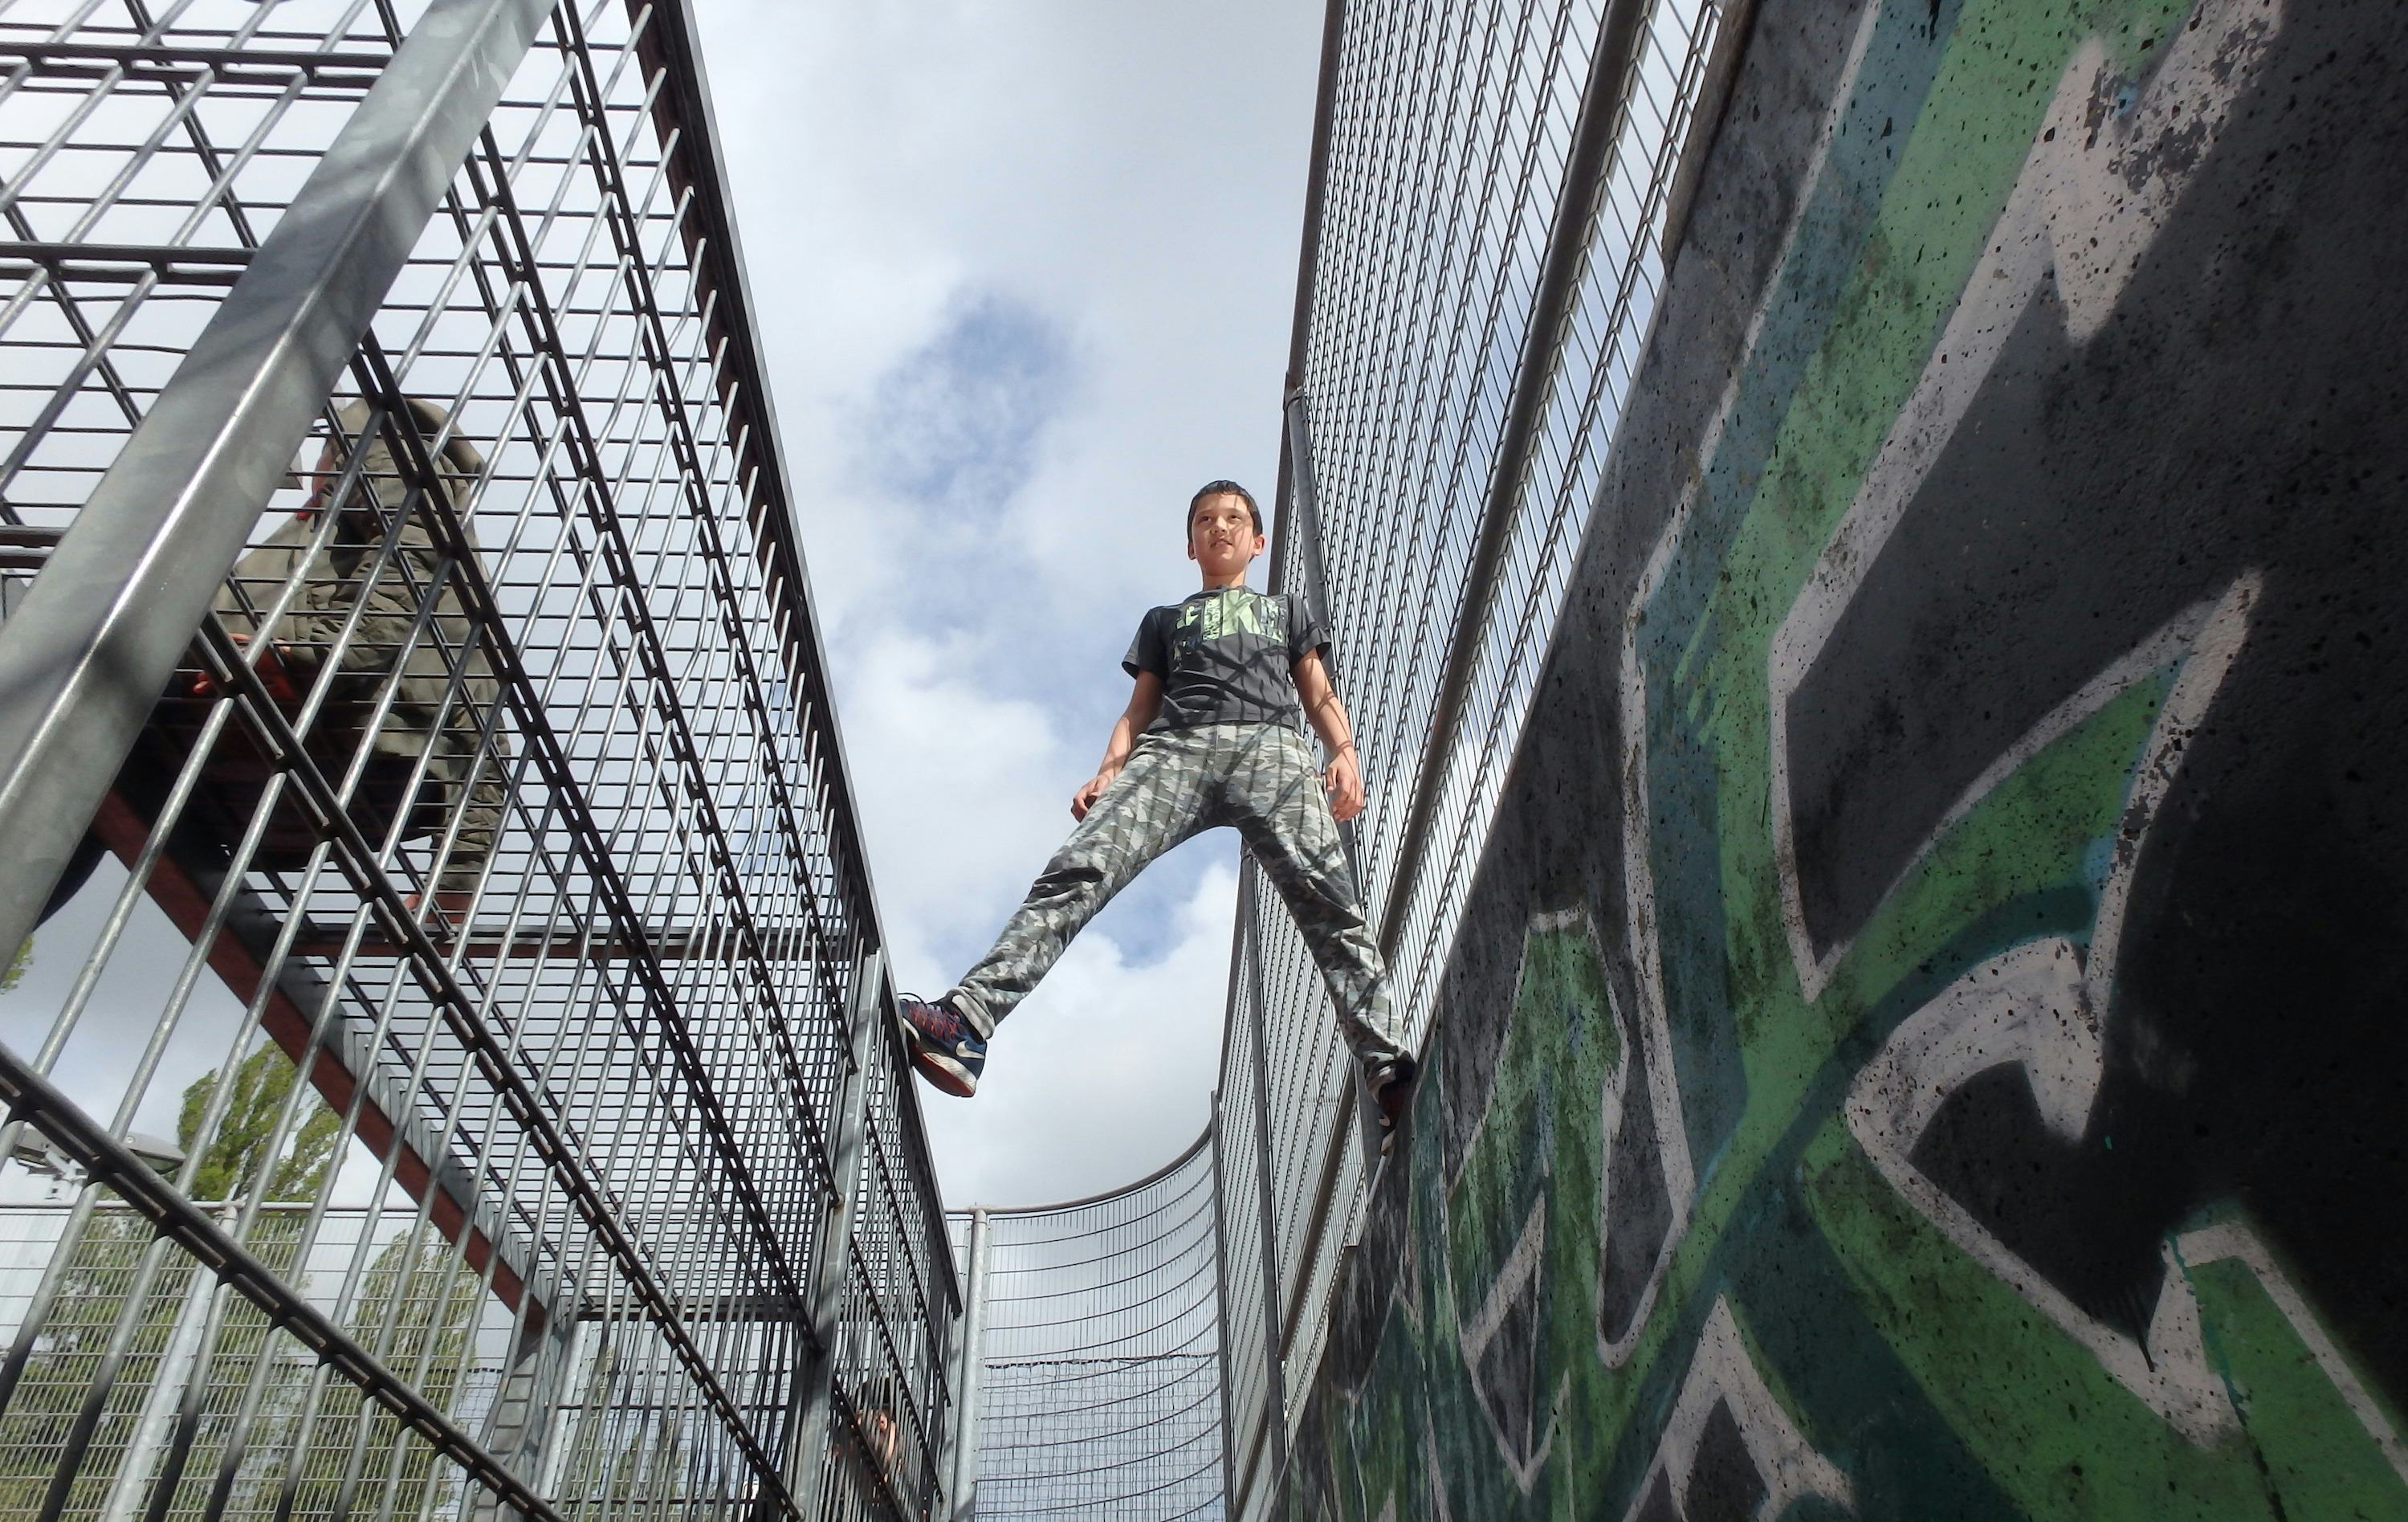 Photo of a boy on top of a graffiti wall and cage construction